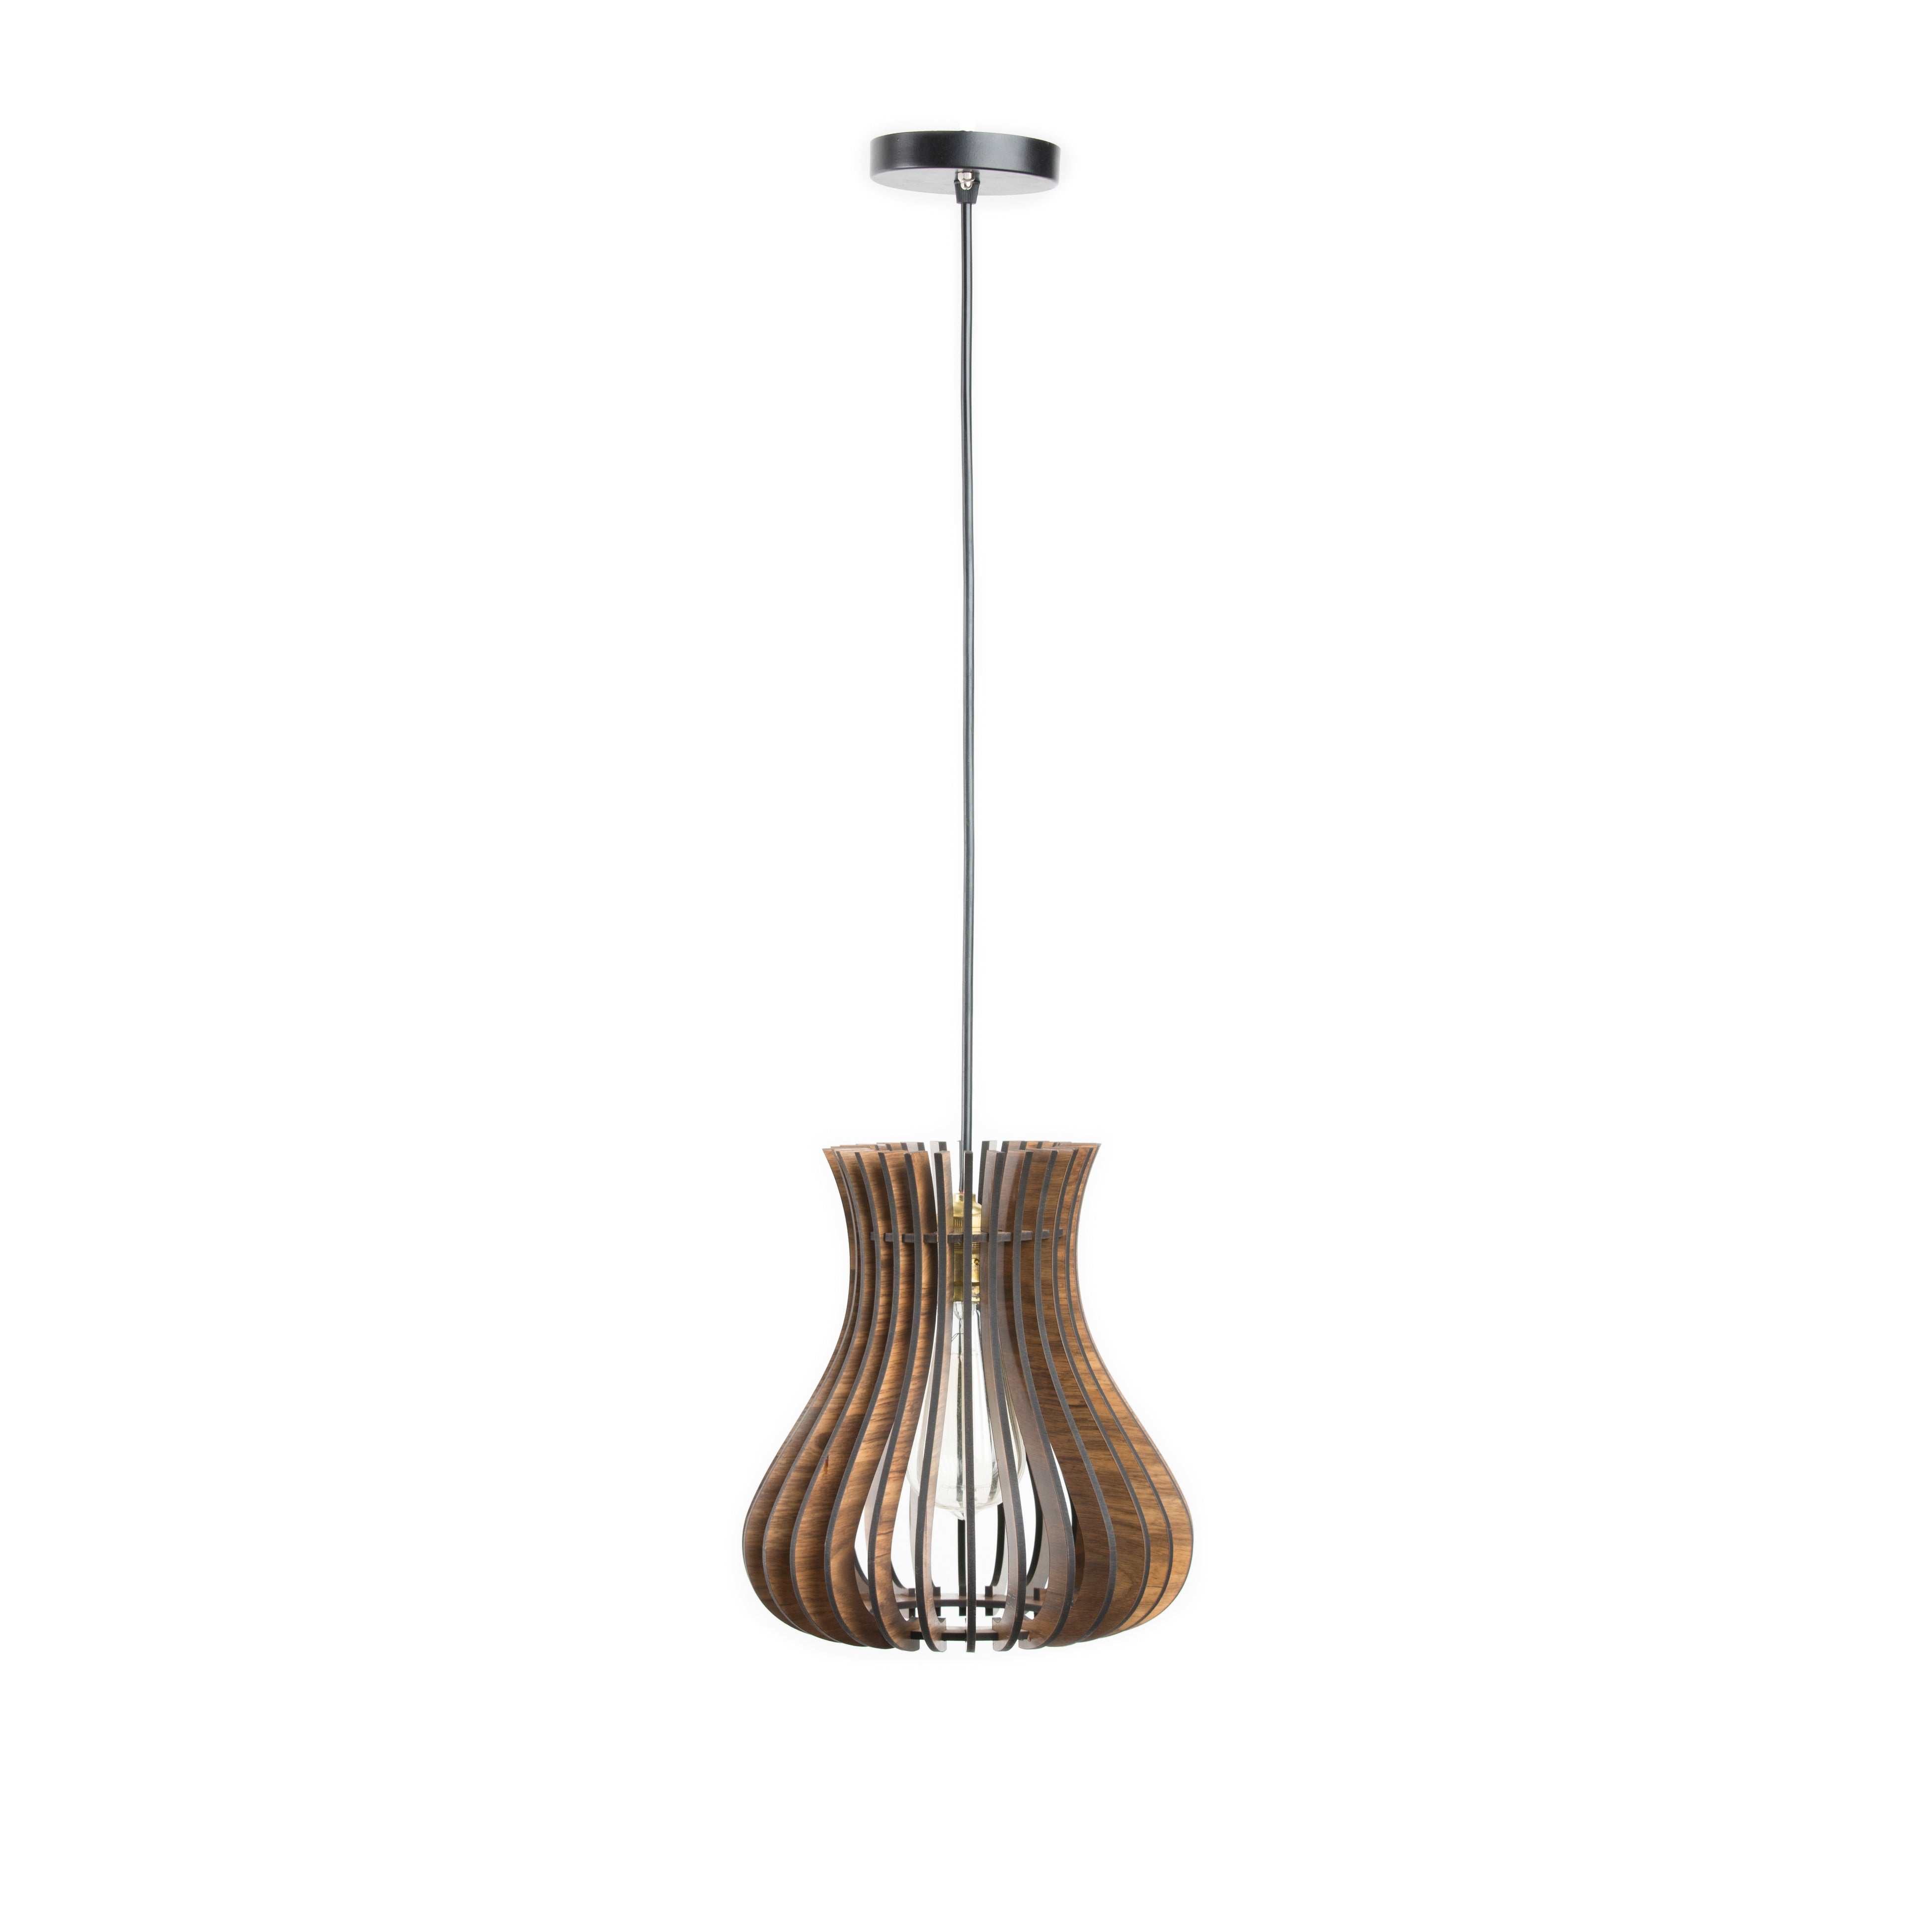 Curvy Wooden Ceiling Lamp